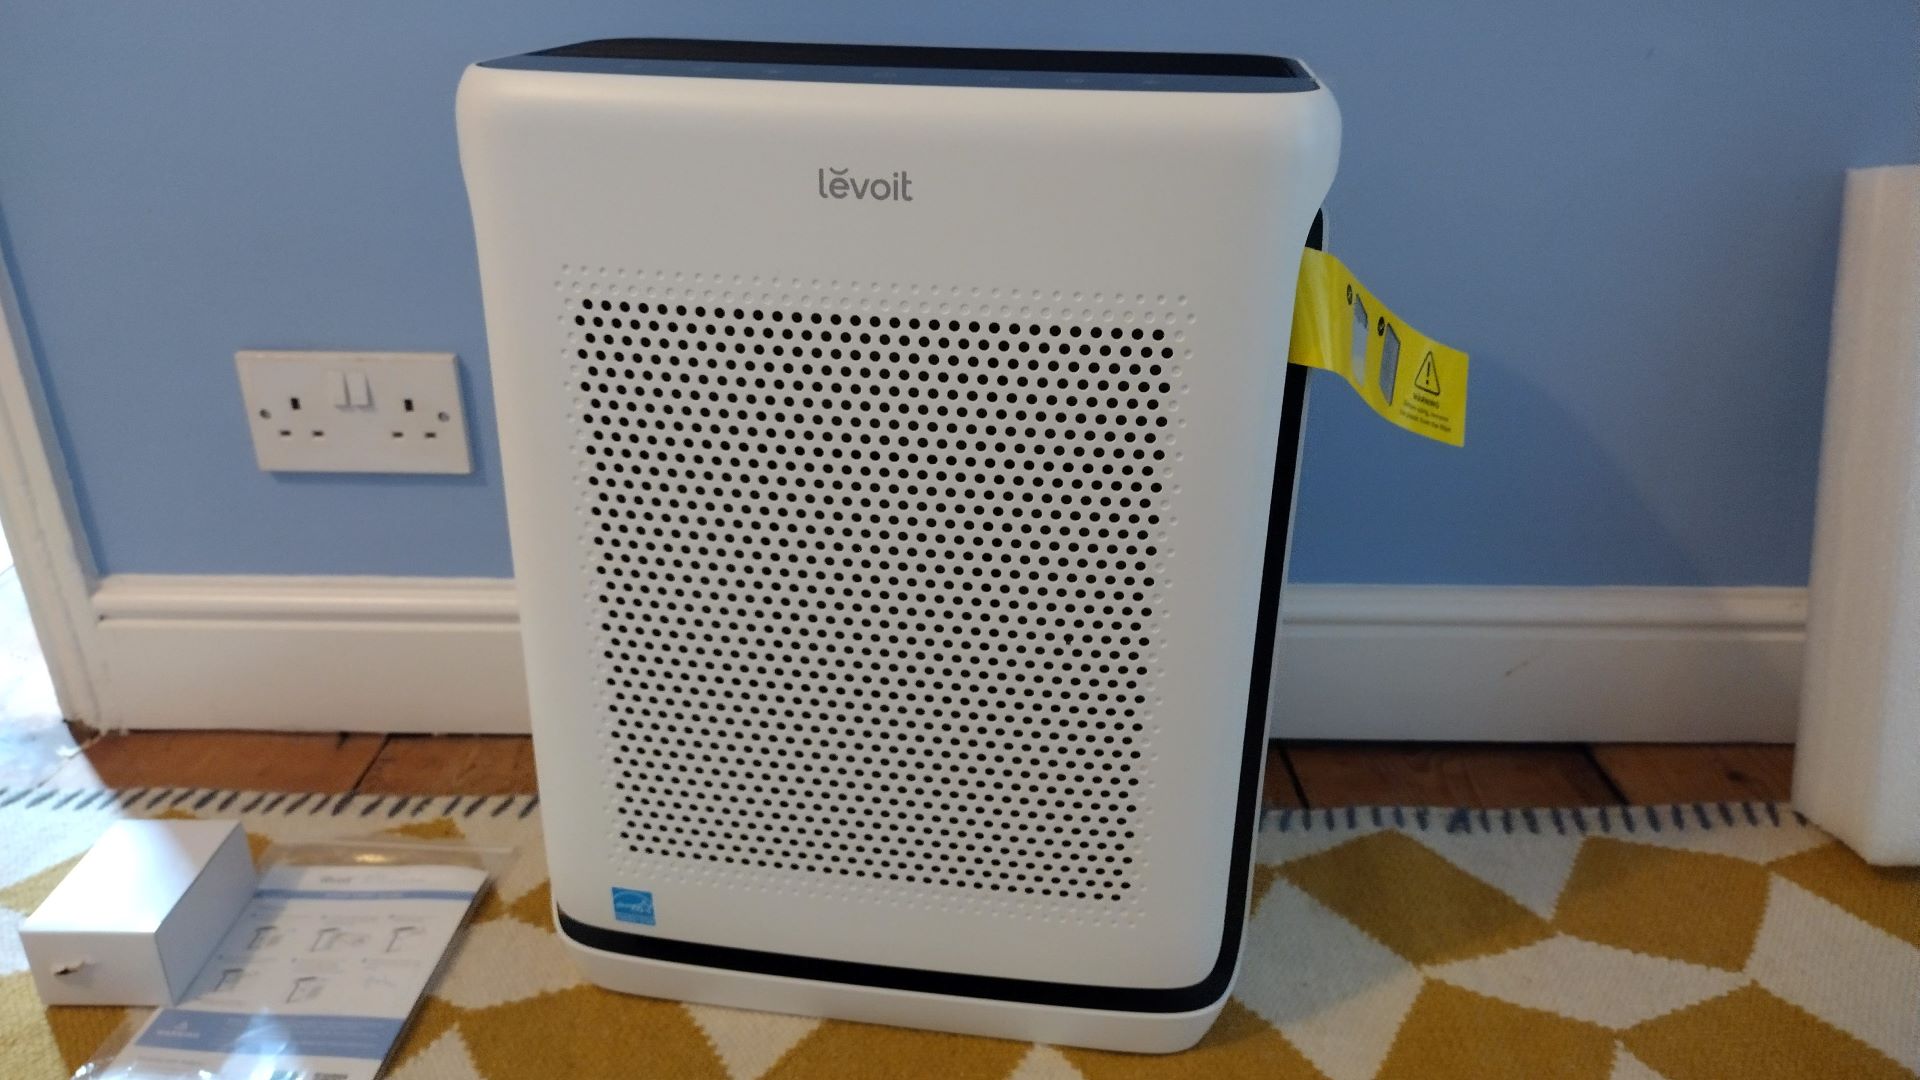 LEVOIT LV-H132 Air Purifier with True Hepa Filter - Unboxing & Testing 